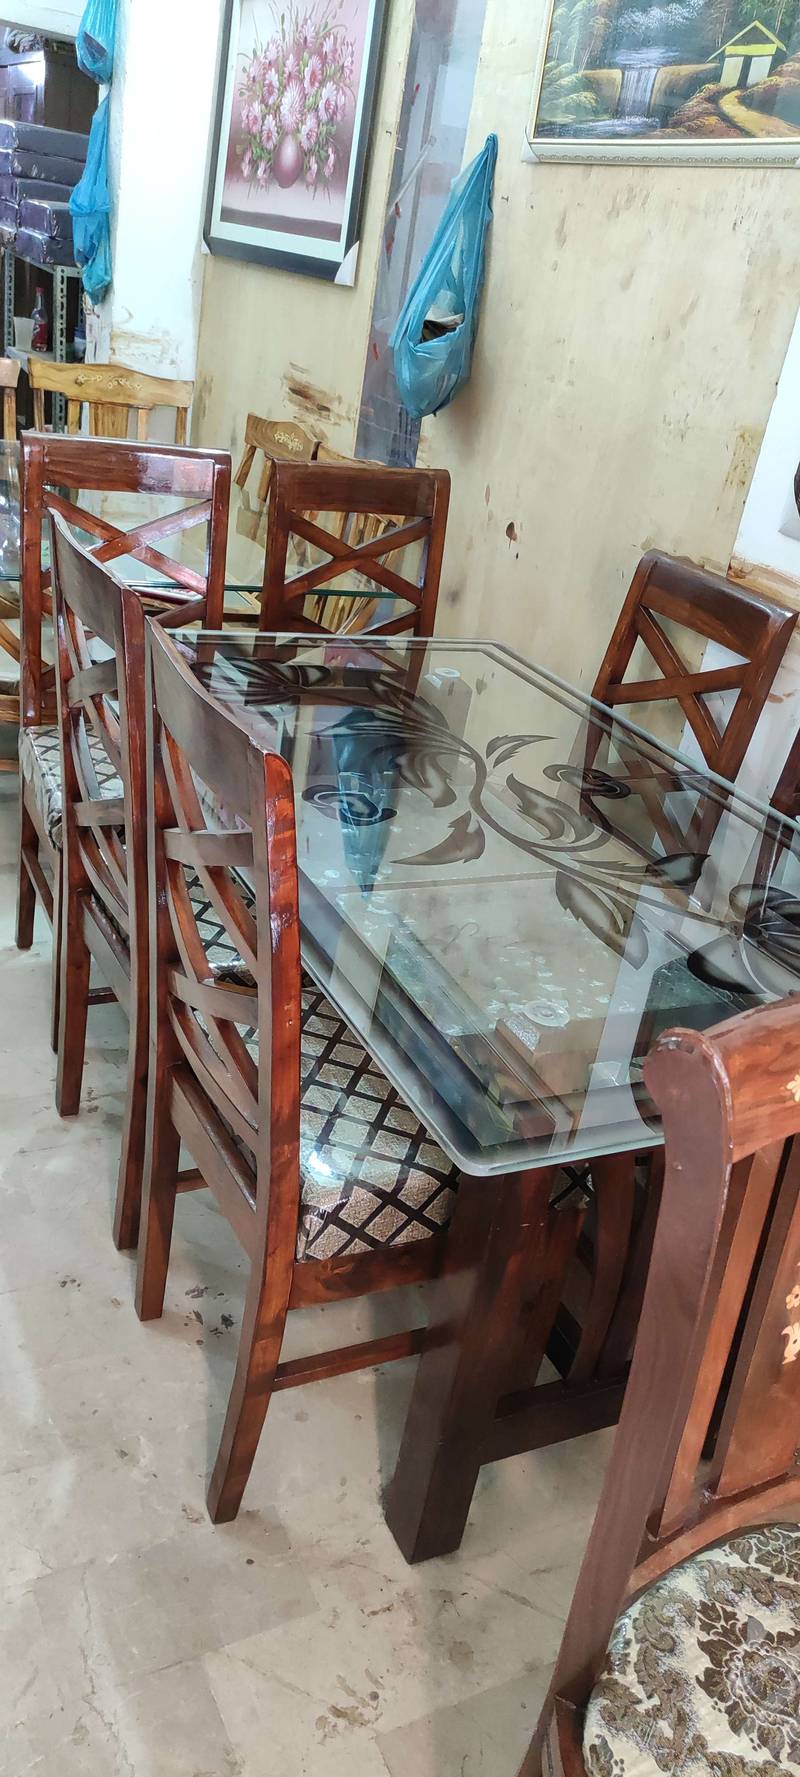 6 CHAIR DINING TABLE SHISHAM WOODEN (NEW) NOT USE. 4